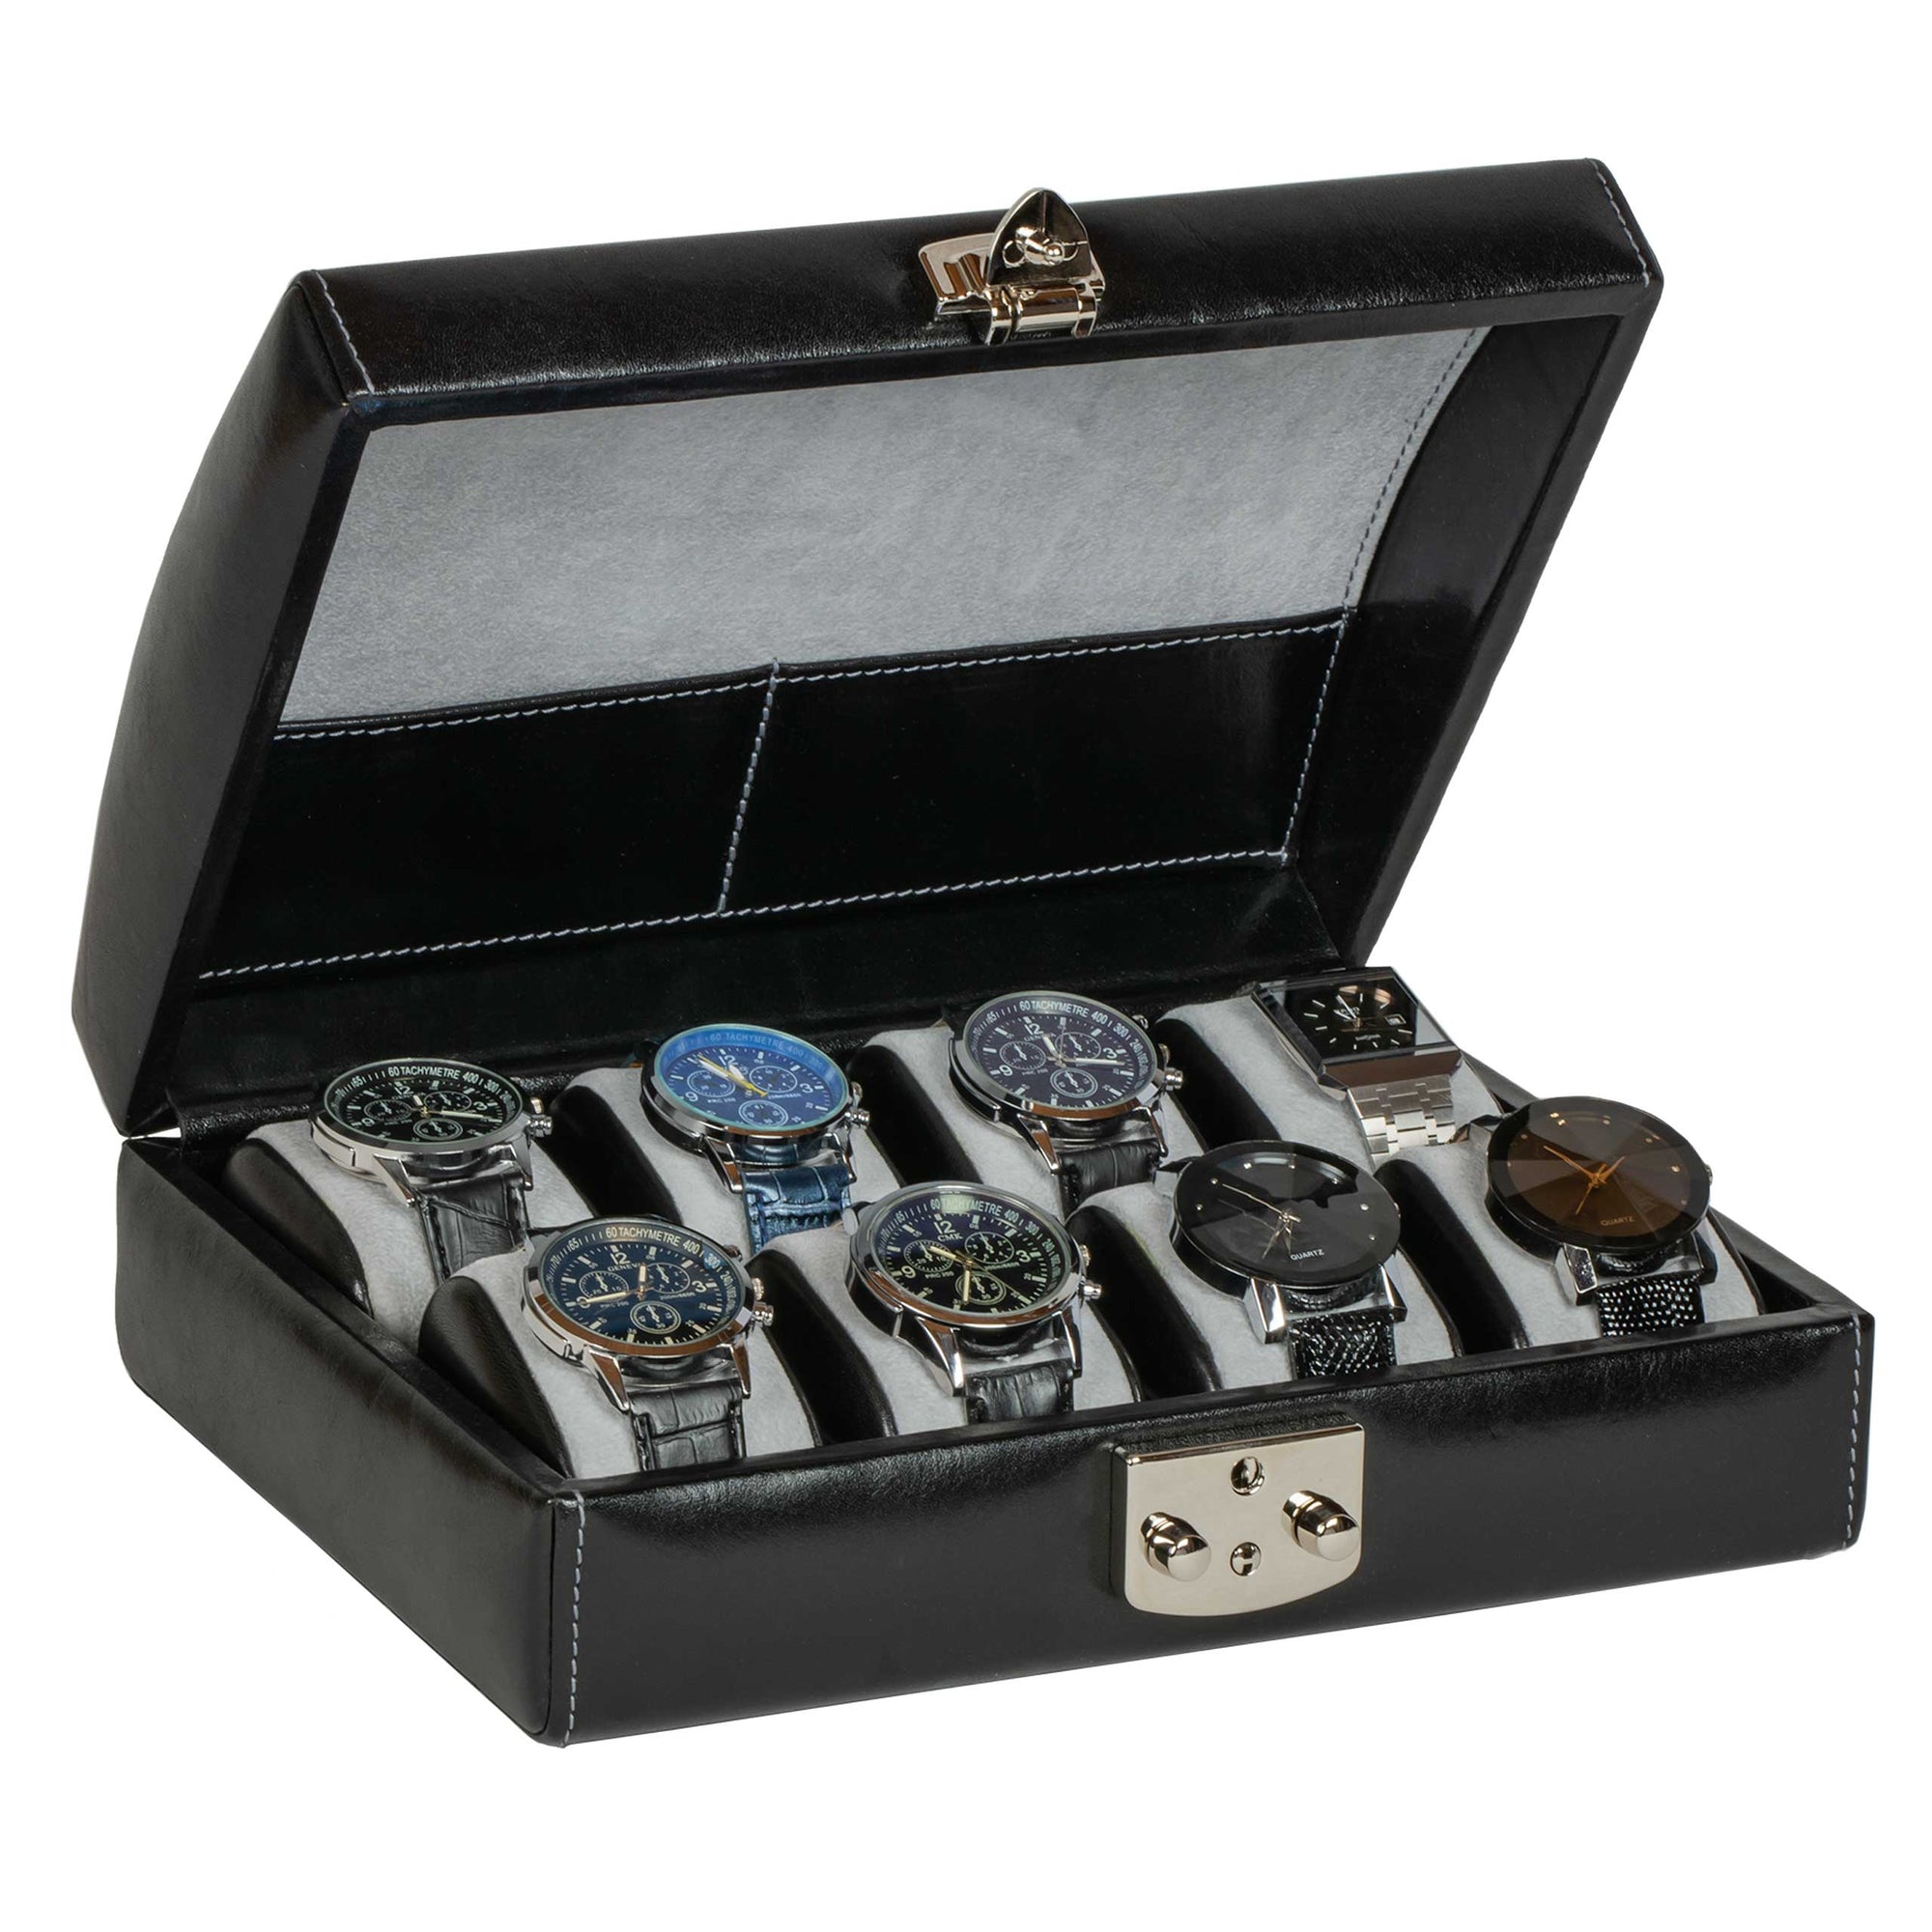 DiLoro Italian Leather Travel Watch Case Holds Eight Watches Midnight Black - Inside View (watch not included)